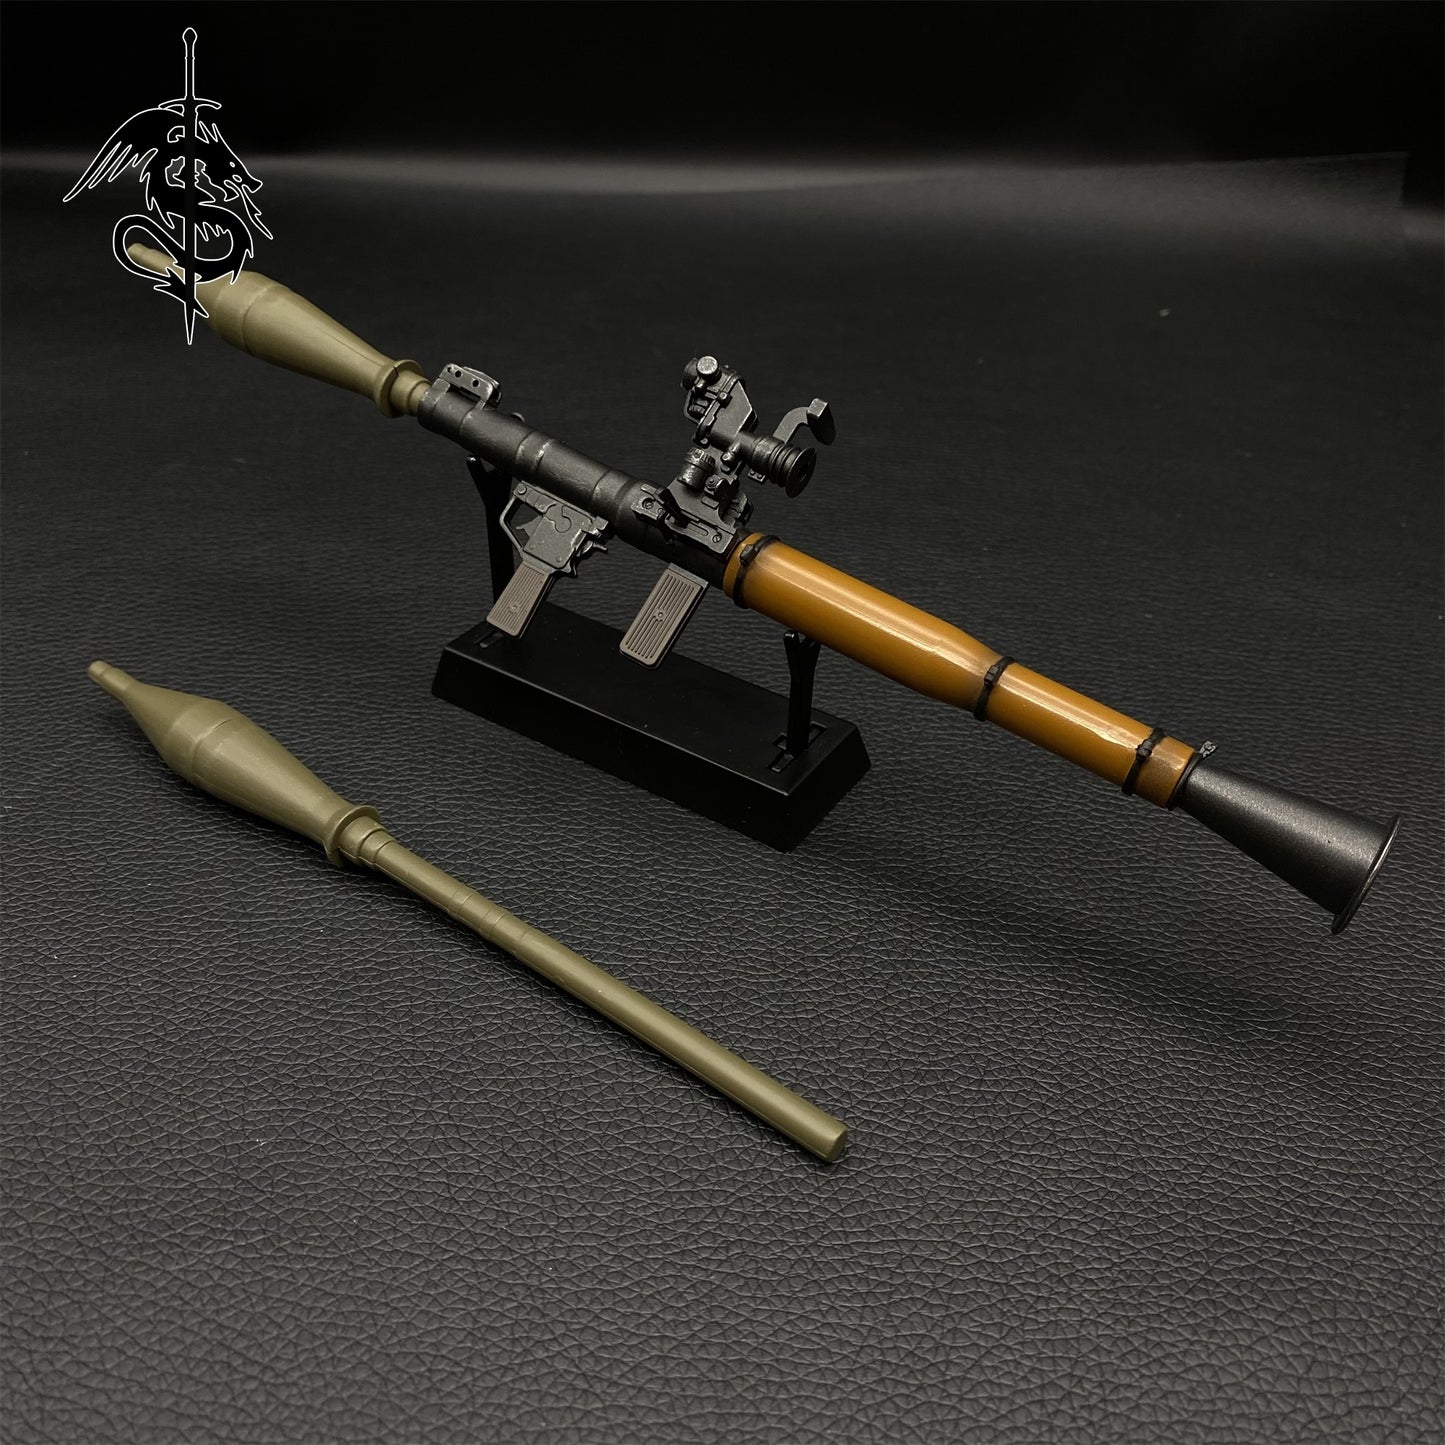 One-Sixth RPG Rocket Launcher Tiny RPG-7 Miniature